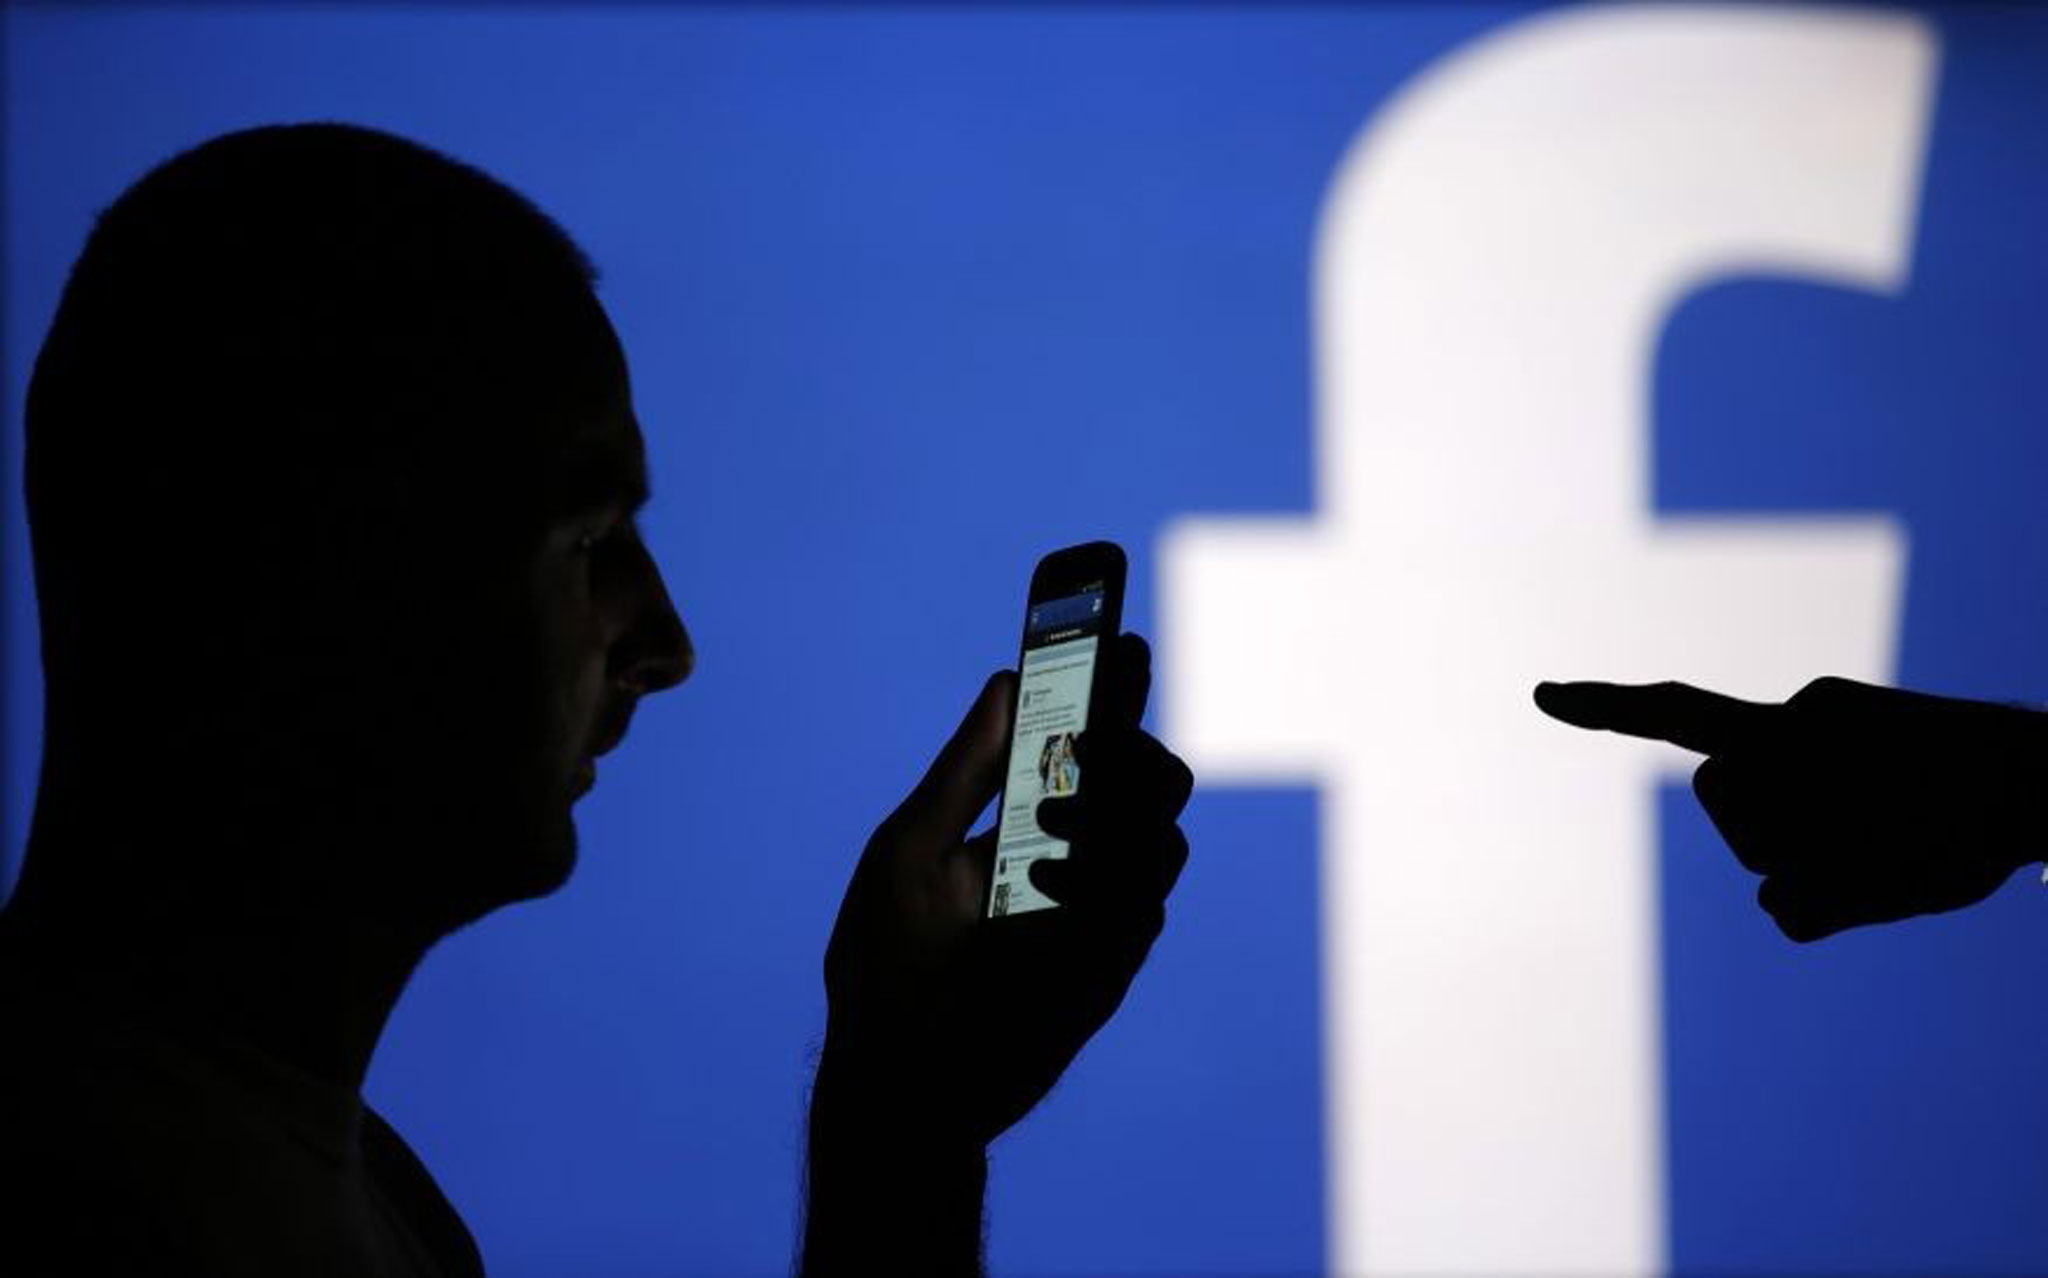 Could Facebook control our minds? (via: Independent)